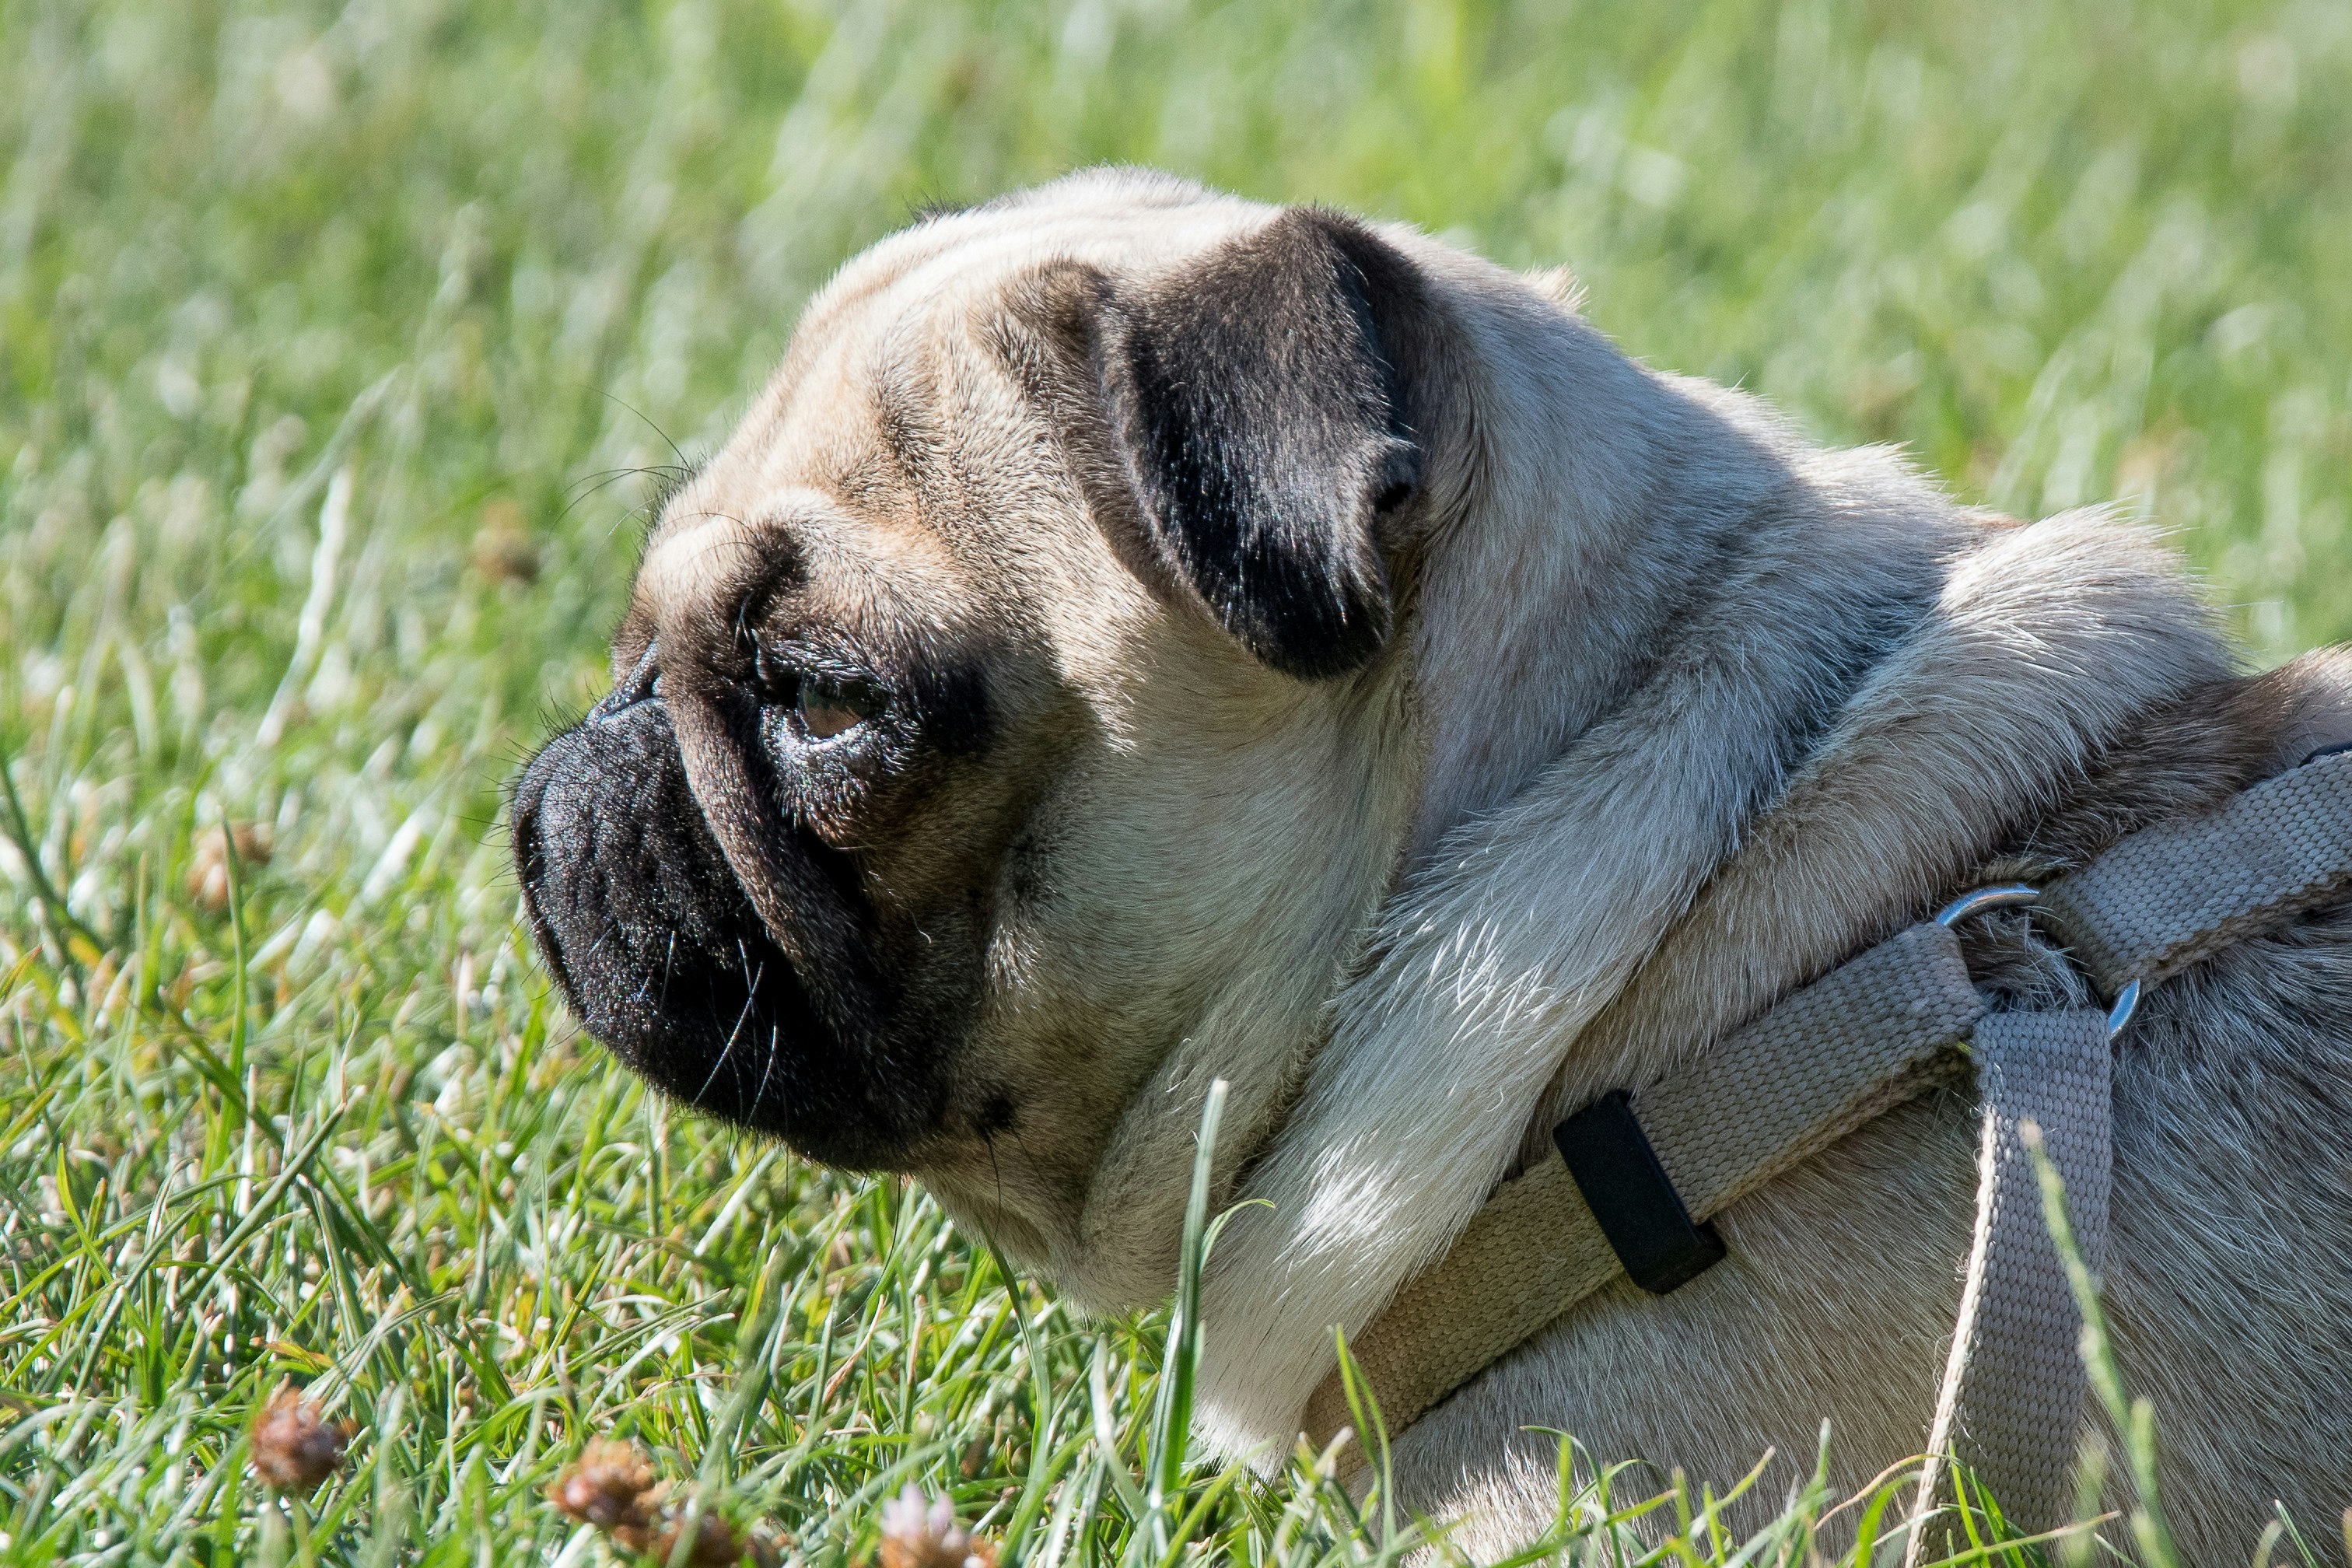 fawn pug laying on grass field